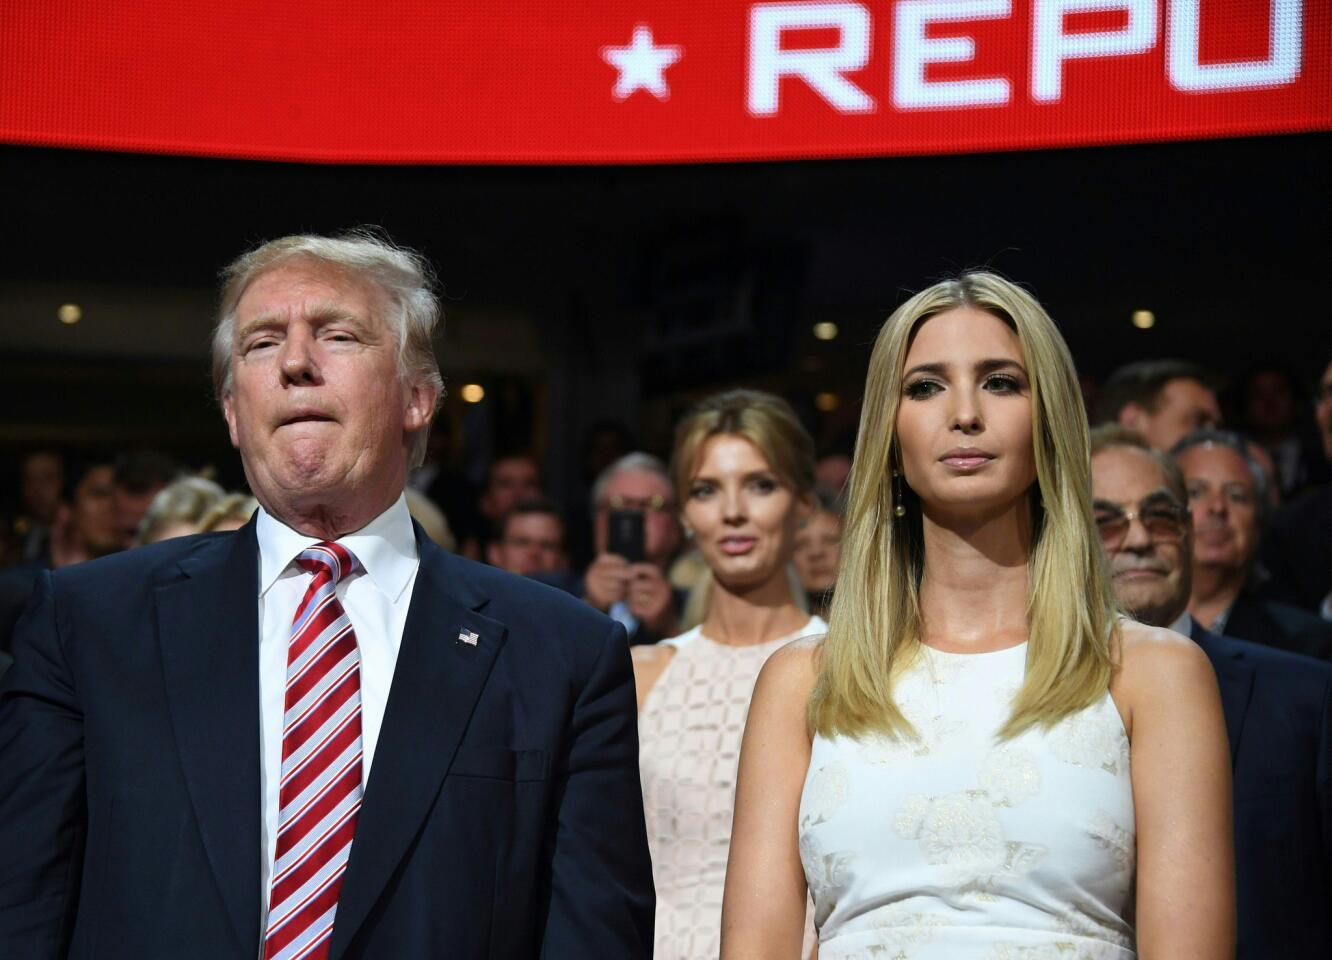 Donald Trump with Ivanka at Republican National Convention in Cleveland